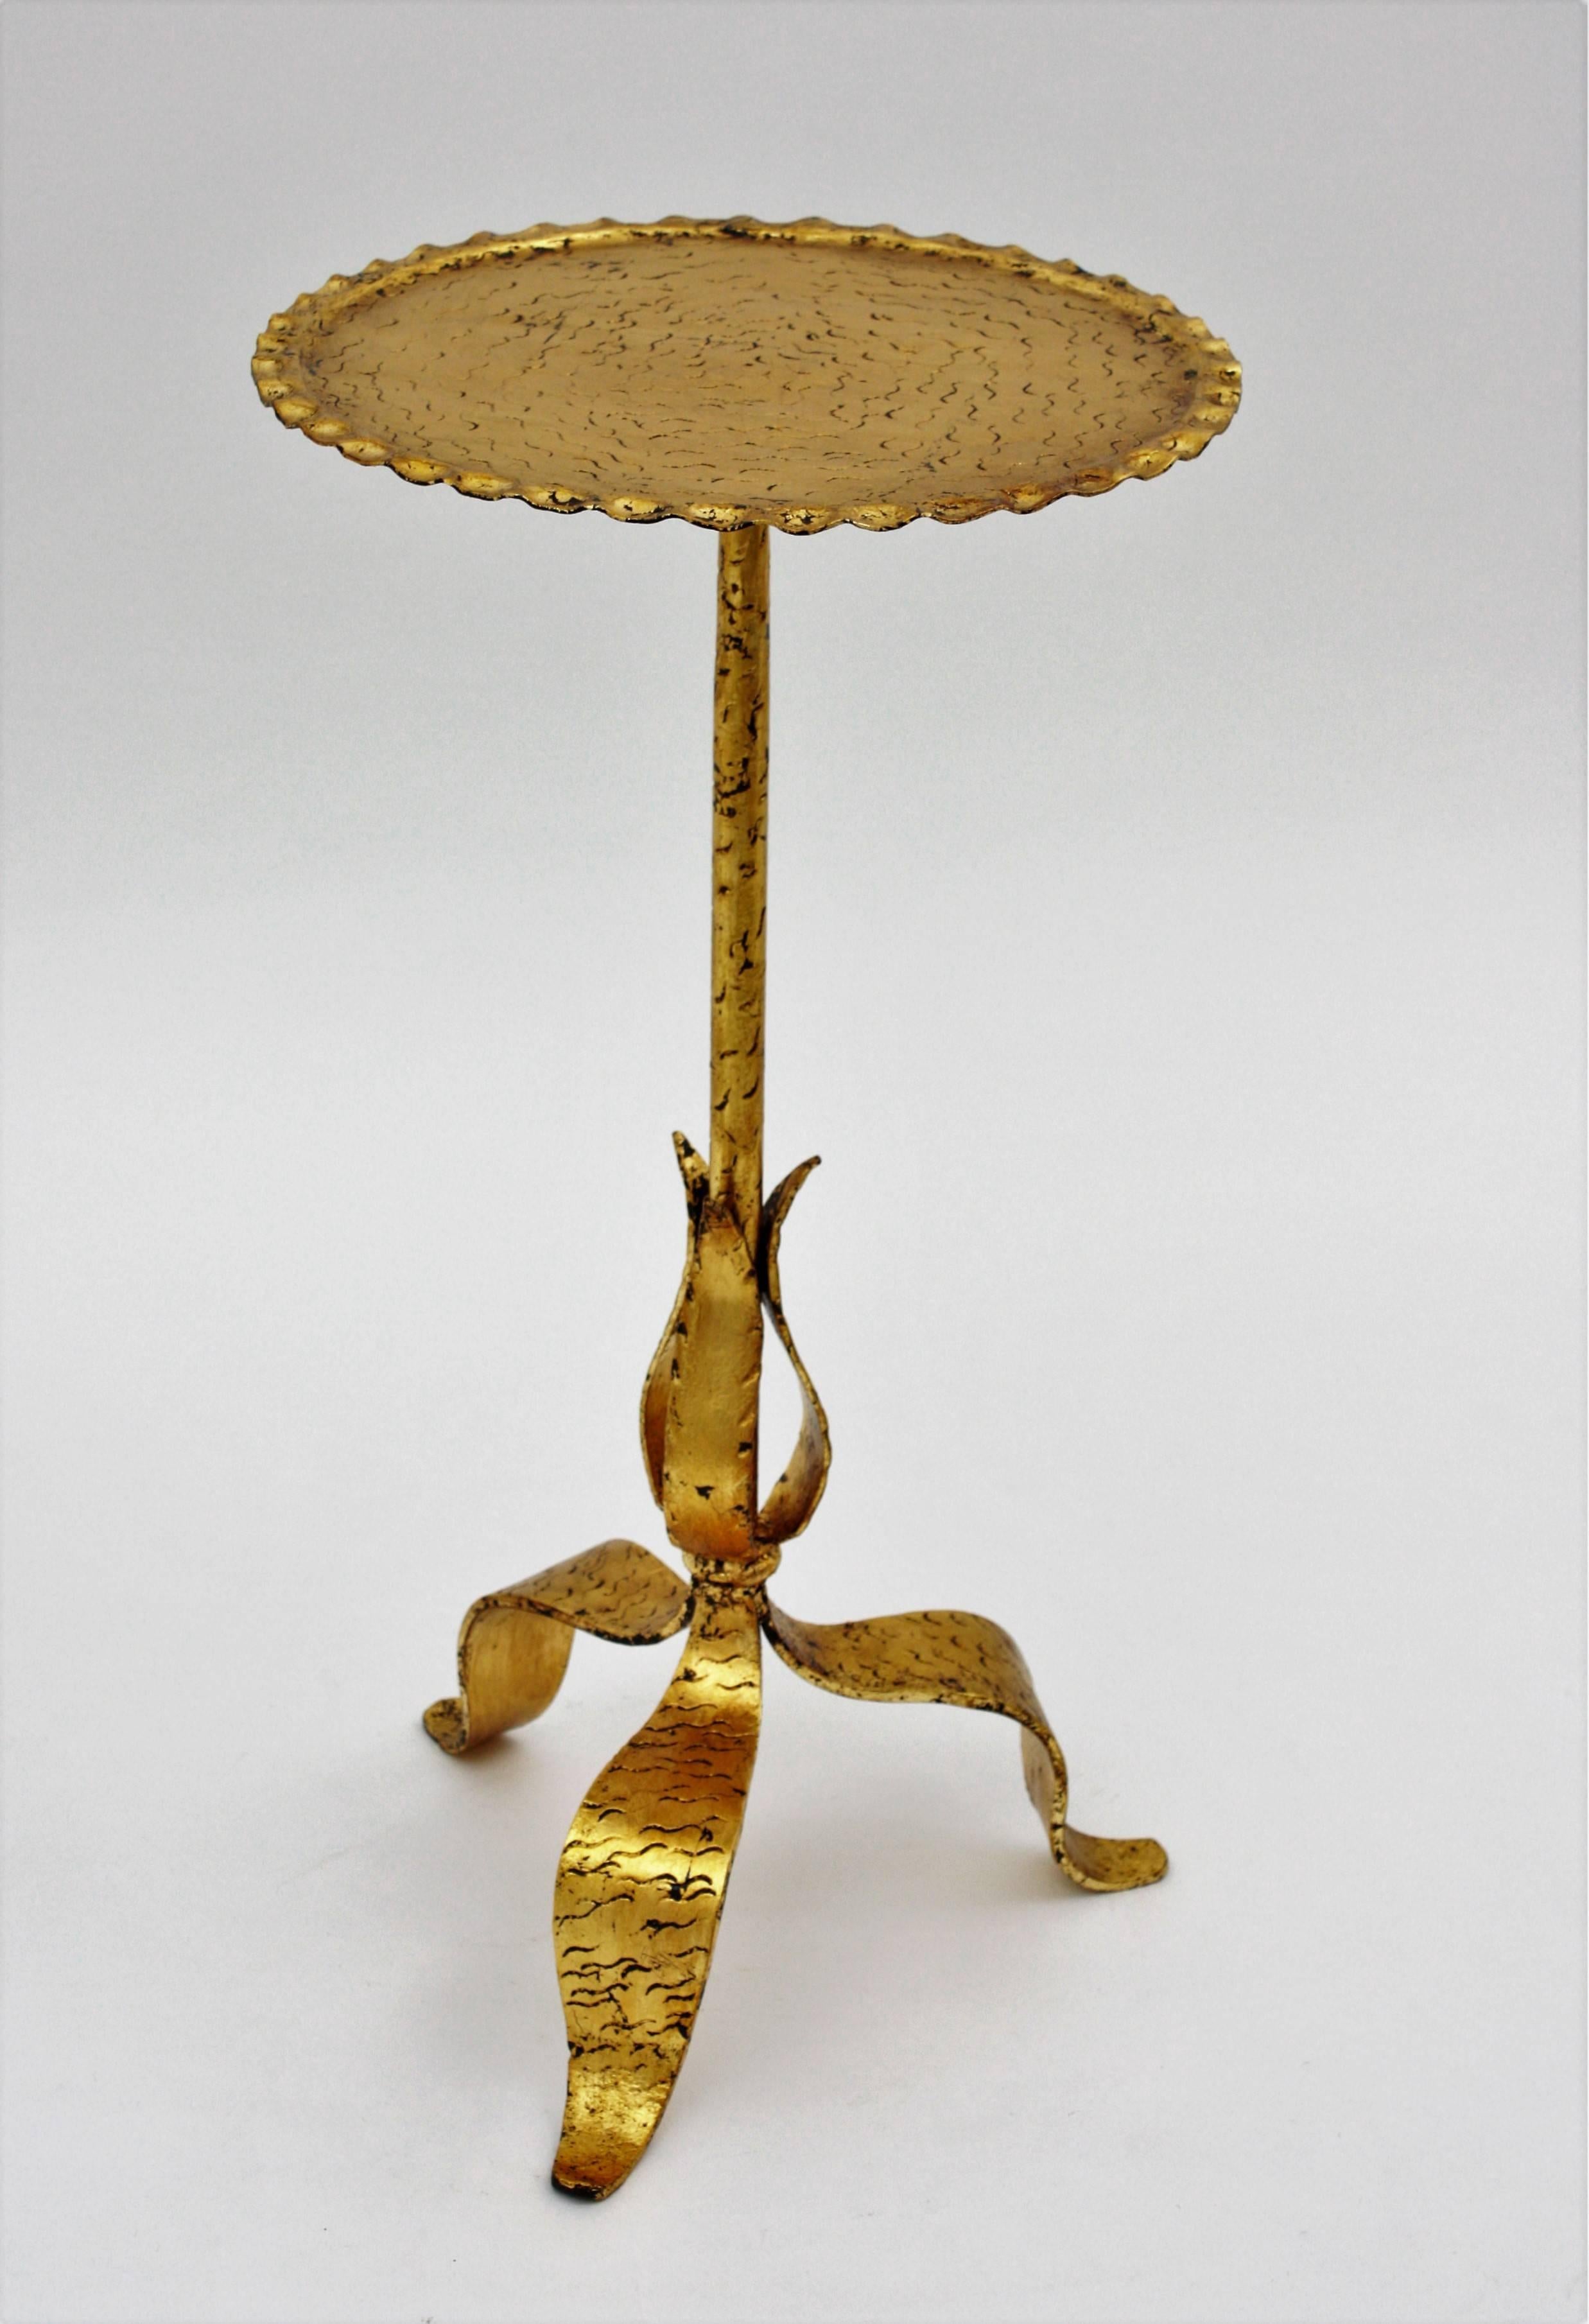 French 1920s Hand-Hammered Gilt Iron Gueridon Table or Stand with Leafed Base 1